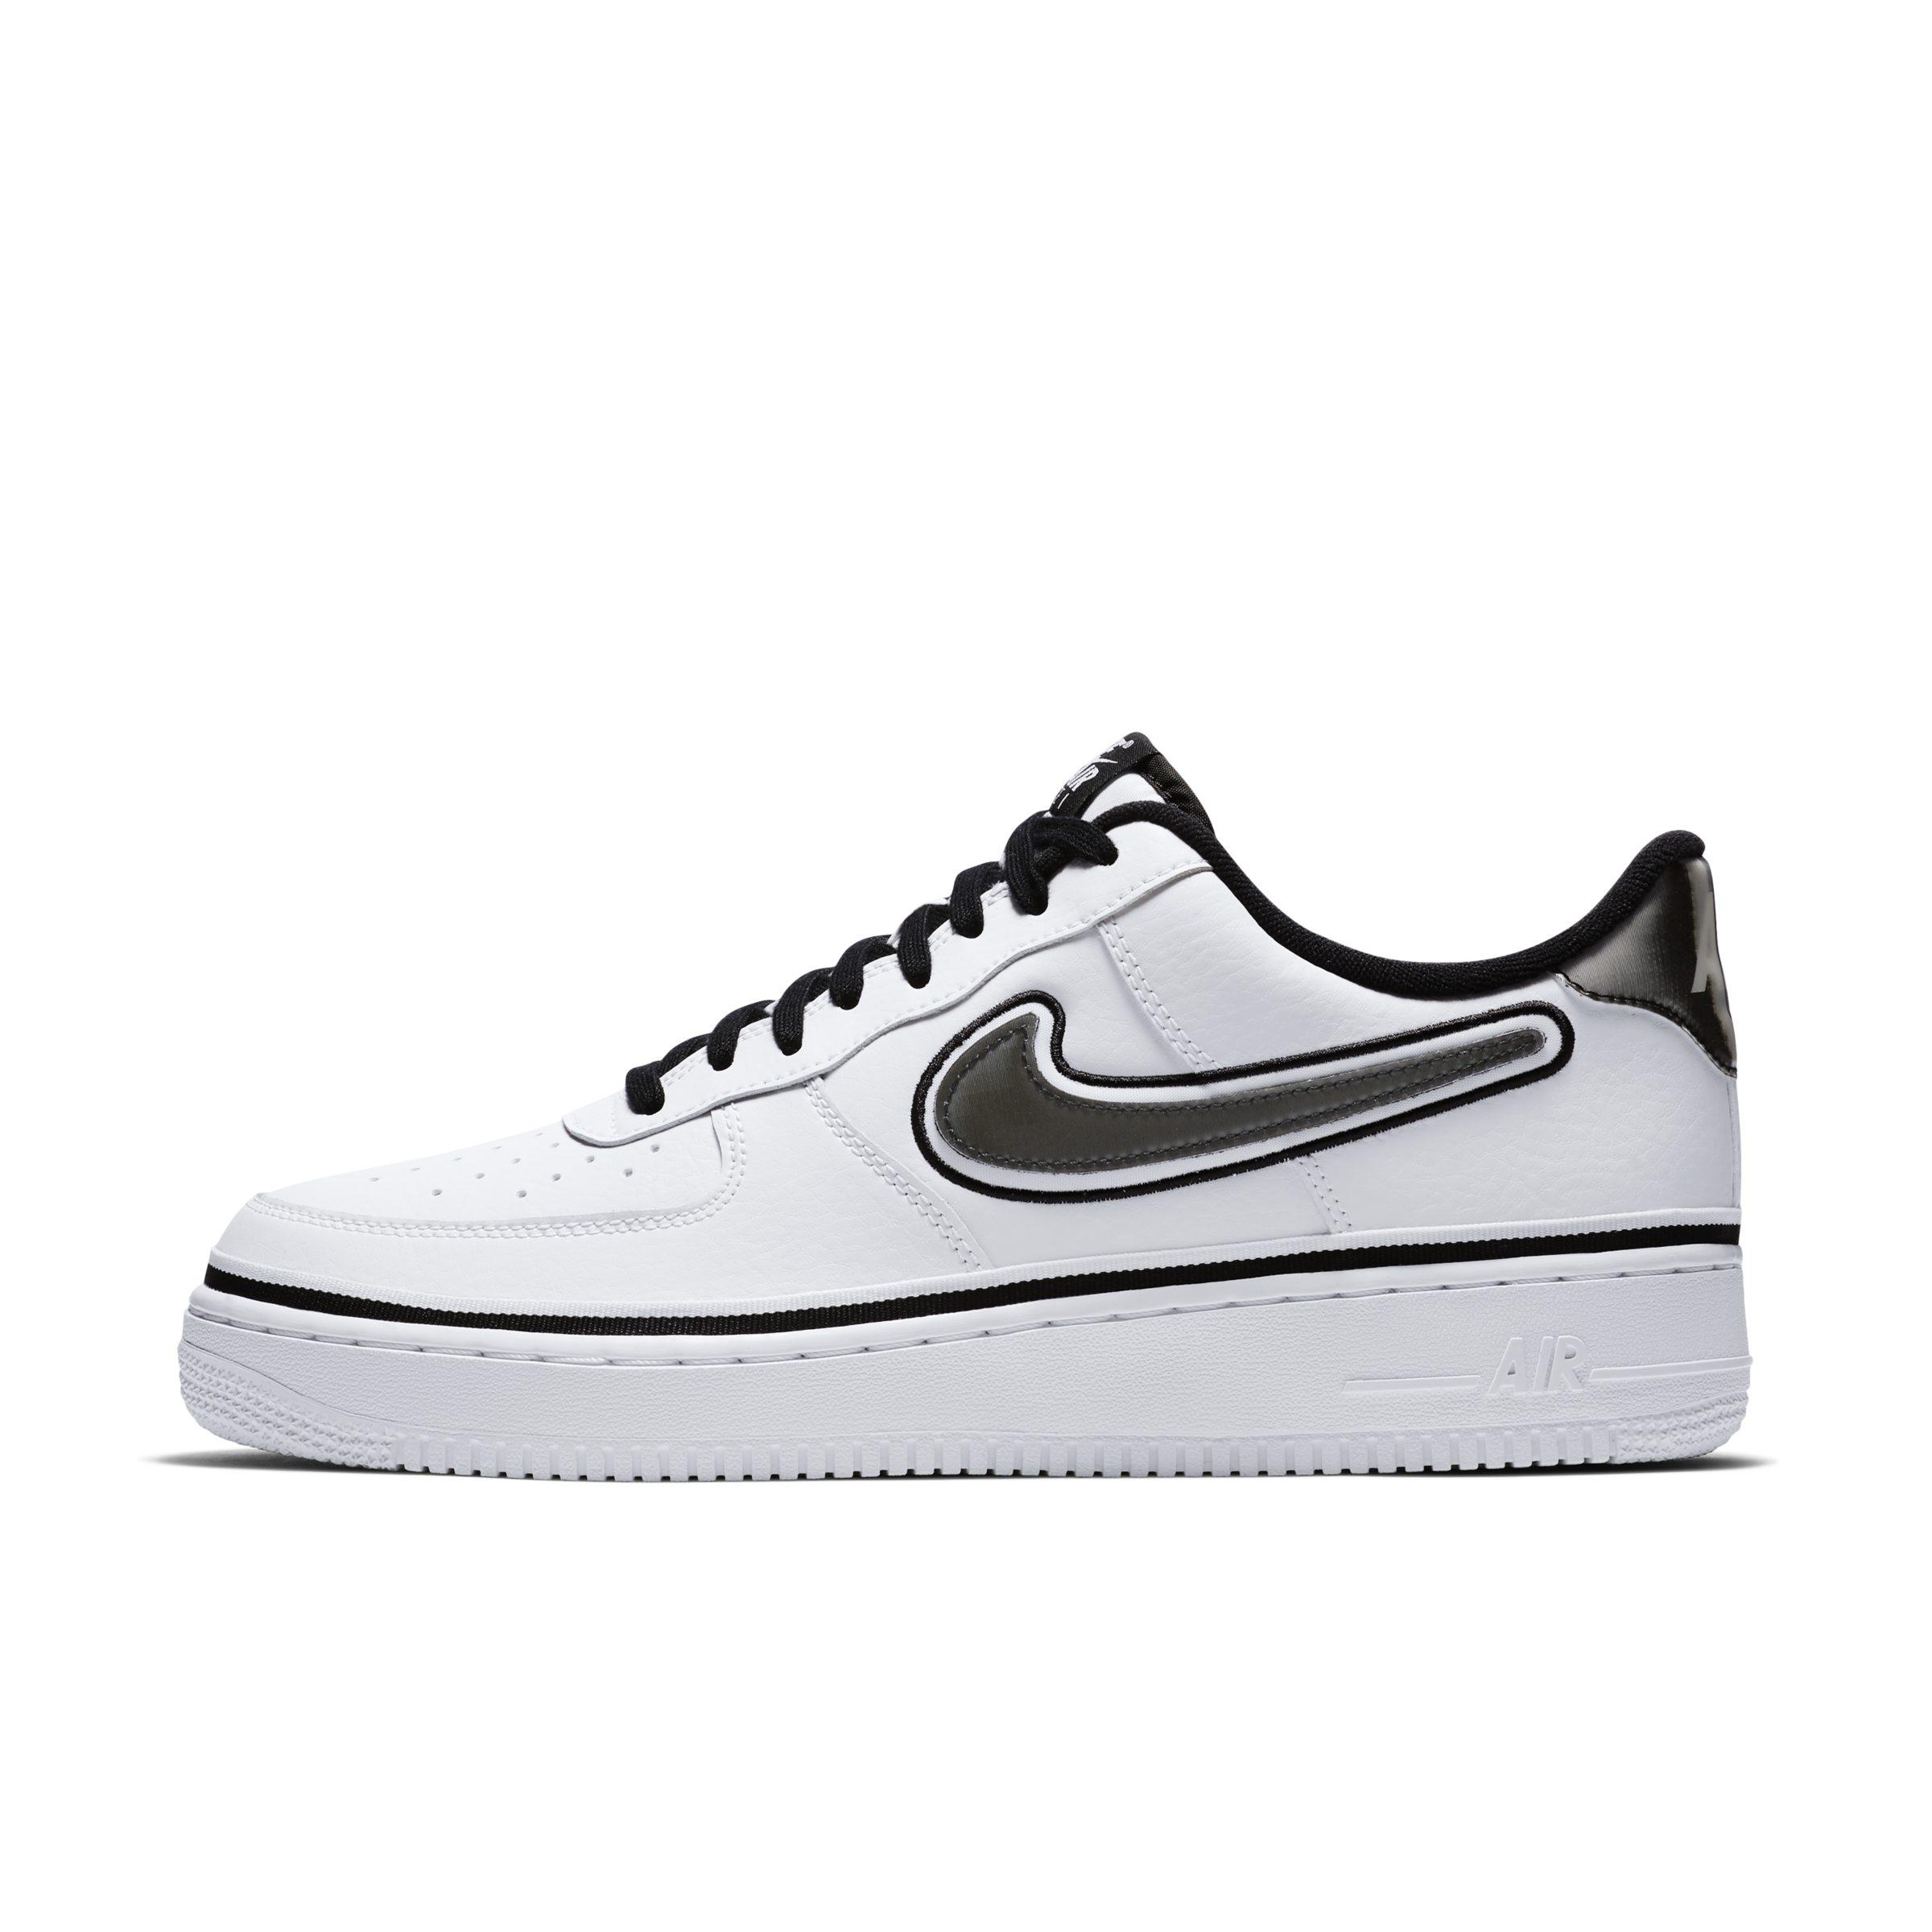 Nike Air Force 1' 07 Lv8 Sport Nba Shoe in White for Men - Lyst